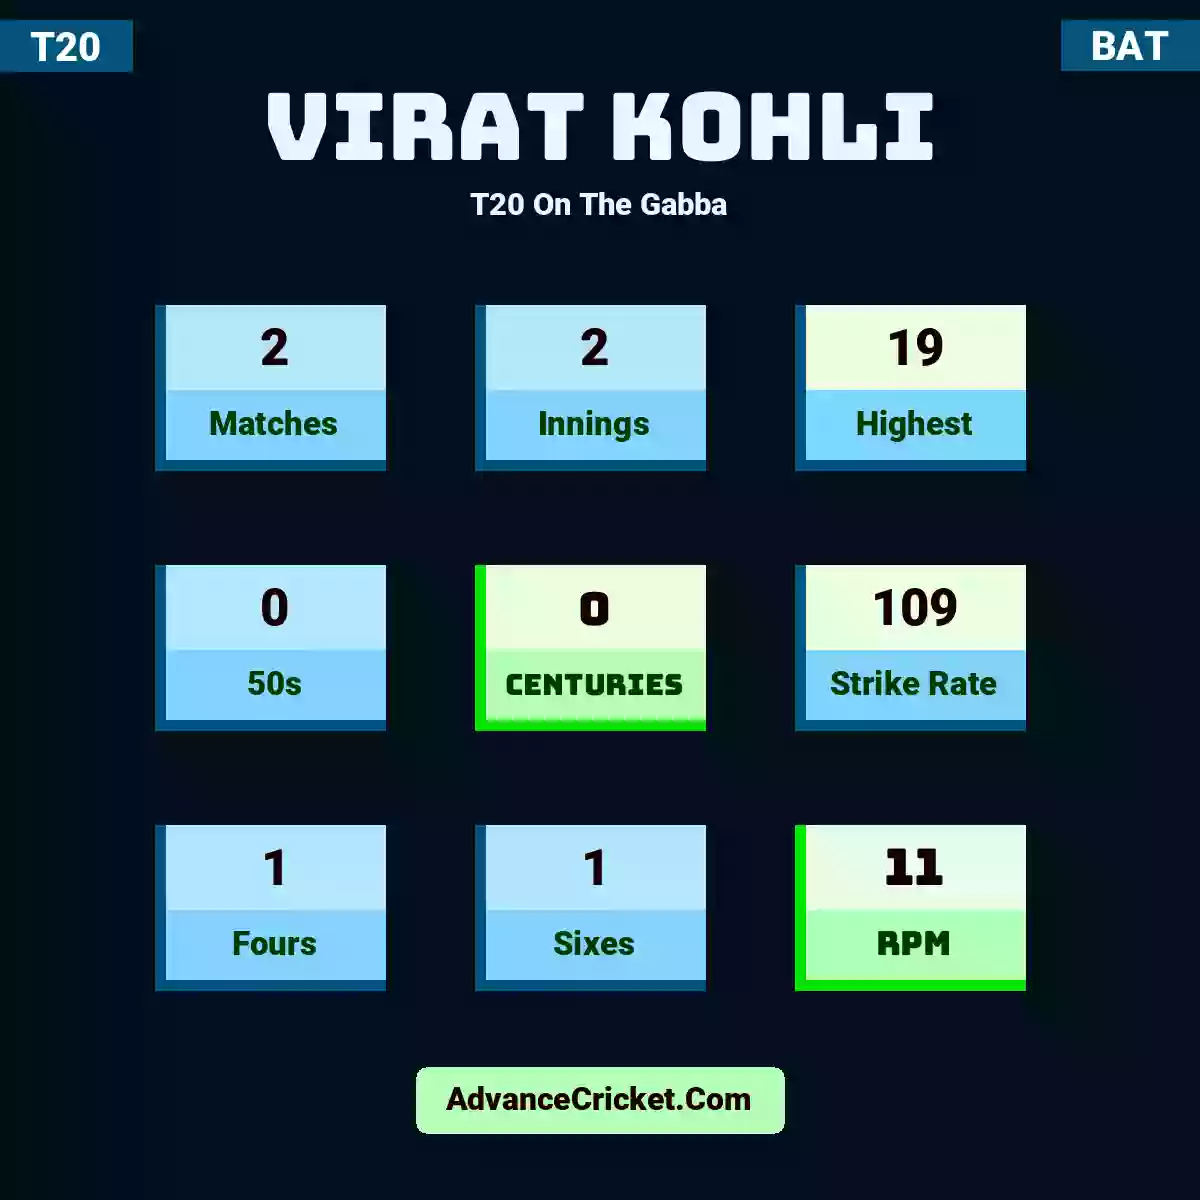 Virat Kohli T20  On The Gabba, Virat Kohli played 2 matches, scored 19 runs as highest, 0 half-centuries, and 0 centuries, with a strike rate of 109. V.Kohli hit 1 fours and 1 sixes, with an RPM of 11.